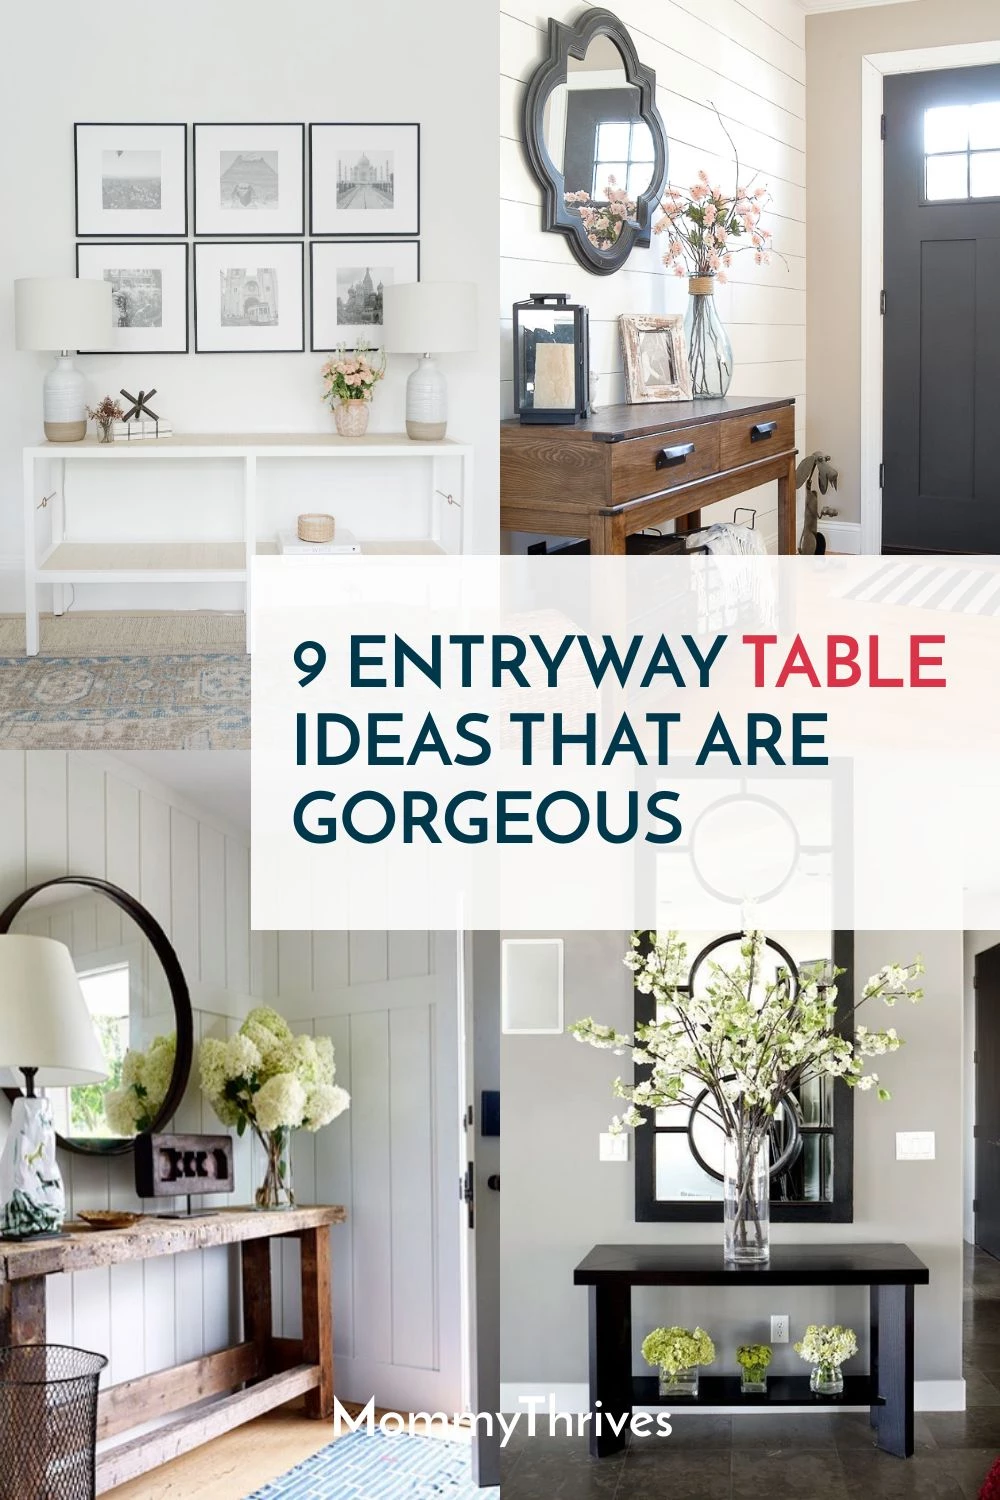 https://www.mommythrives.com/wp-content/uploads/2018/04/Beautiful-Entryway-Ideas-For-Every-Style-Entryway-Ideas-For-Your-Home-How-To-Style-A-Beautiful-Entryway-Table.webp